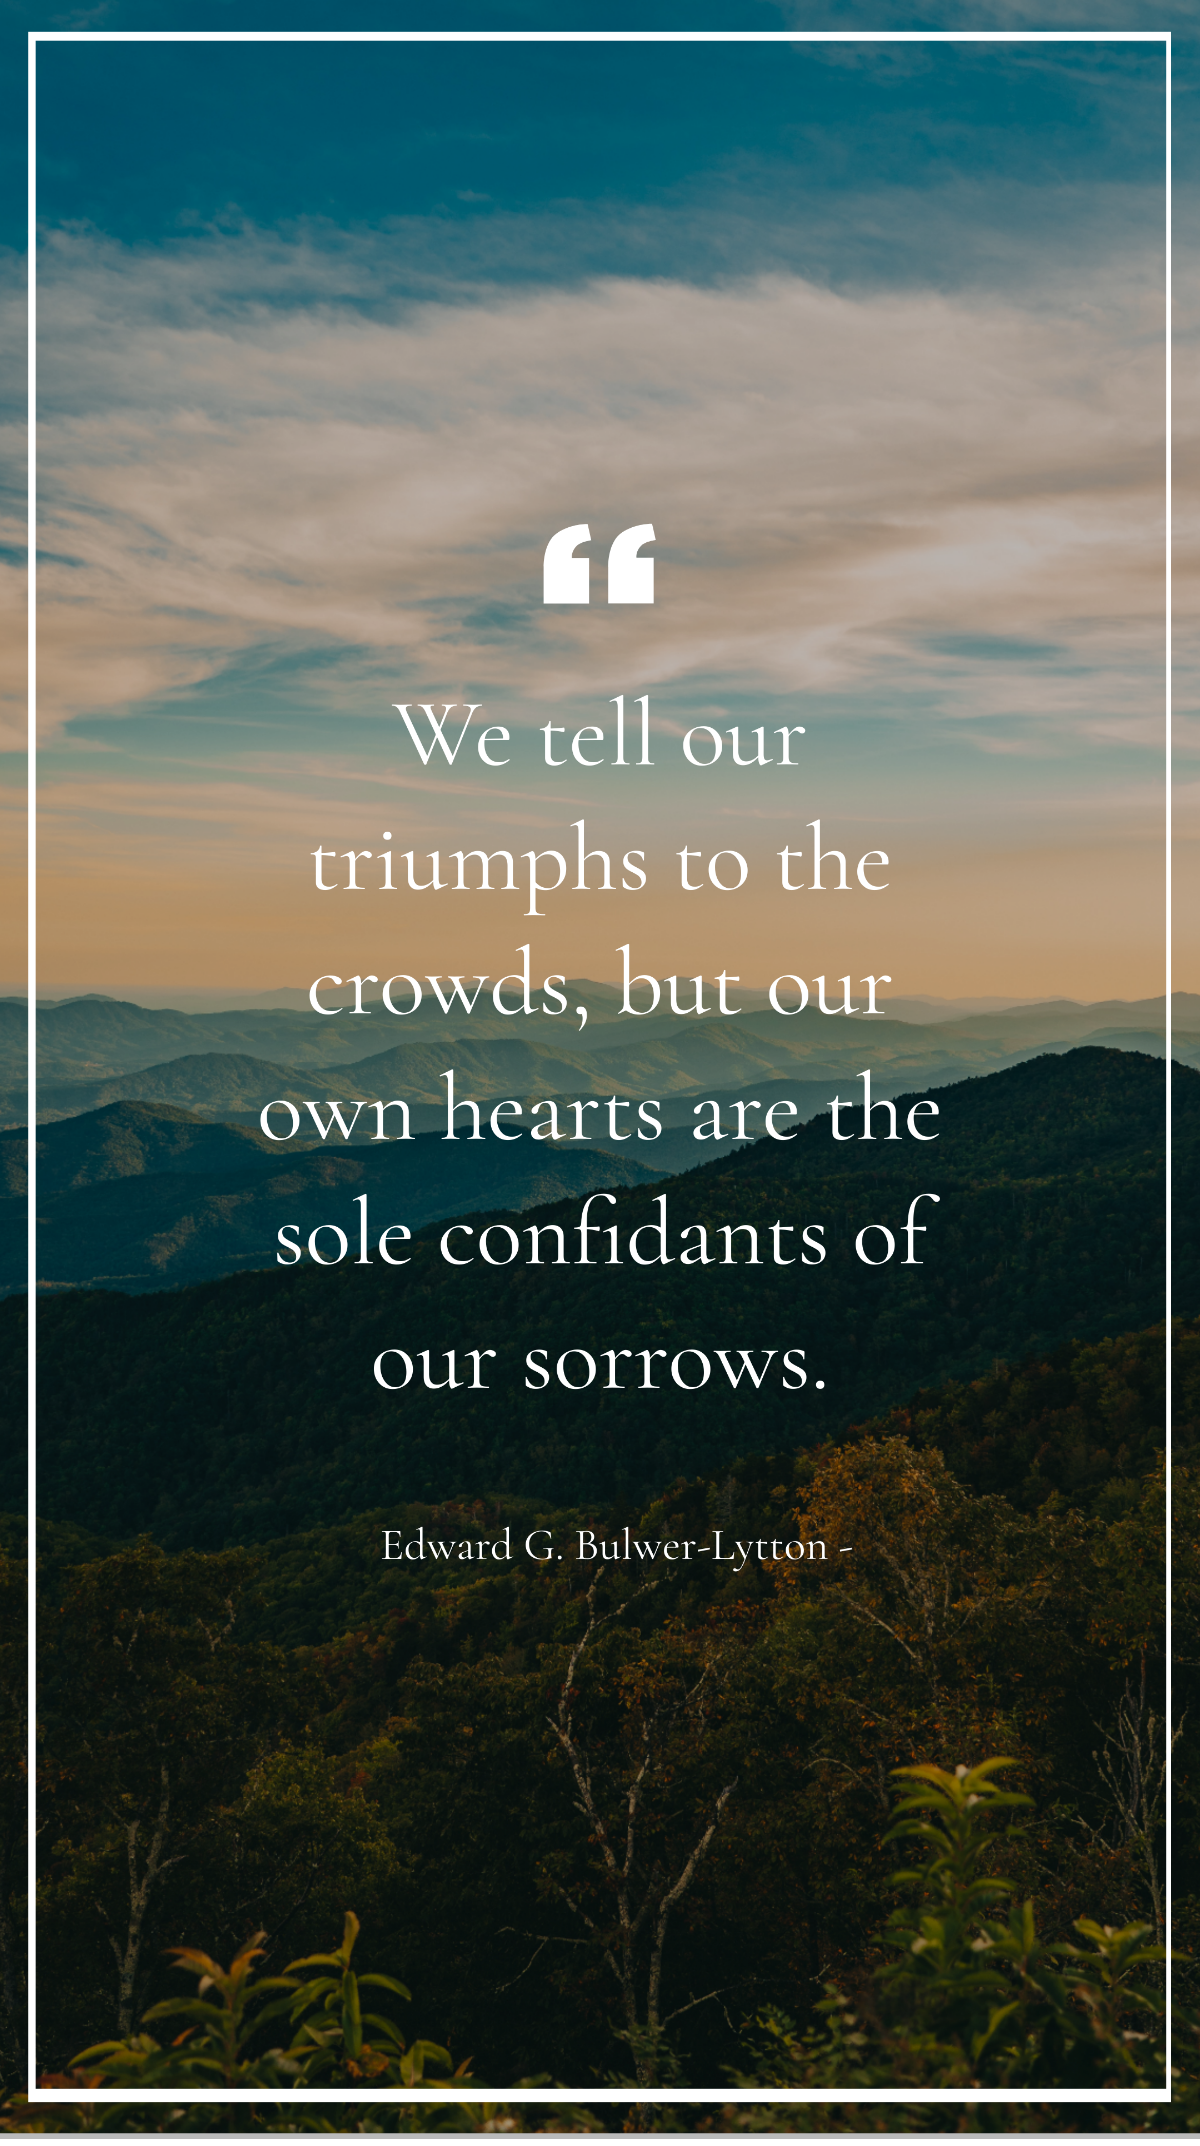 Edward G. Bulwer-Lytton - We tell our triumphs to the crowds, but our own hearts are the sole confidants of our sorrows. Template